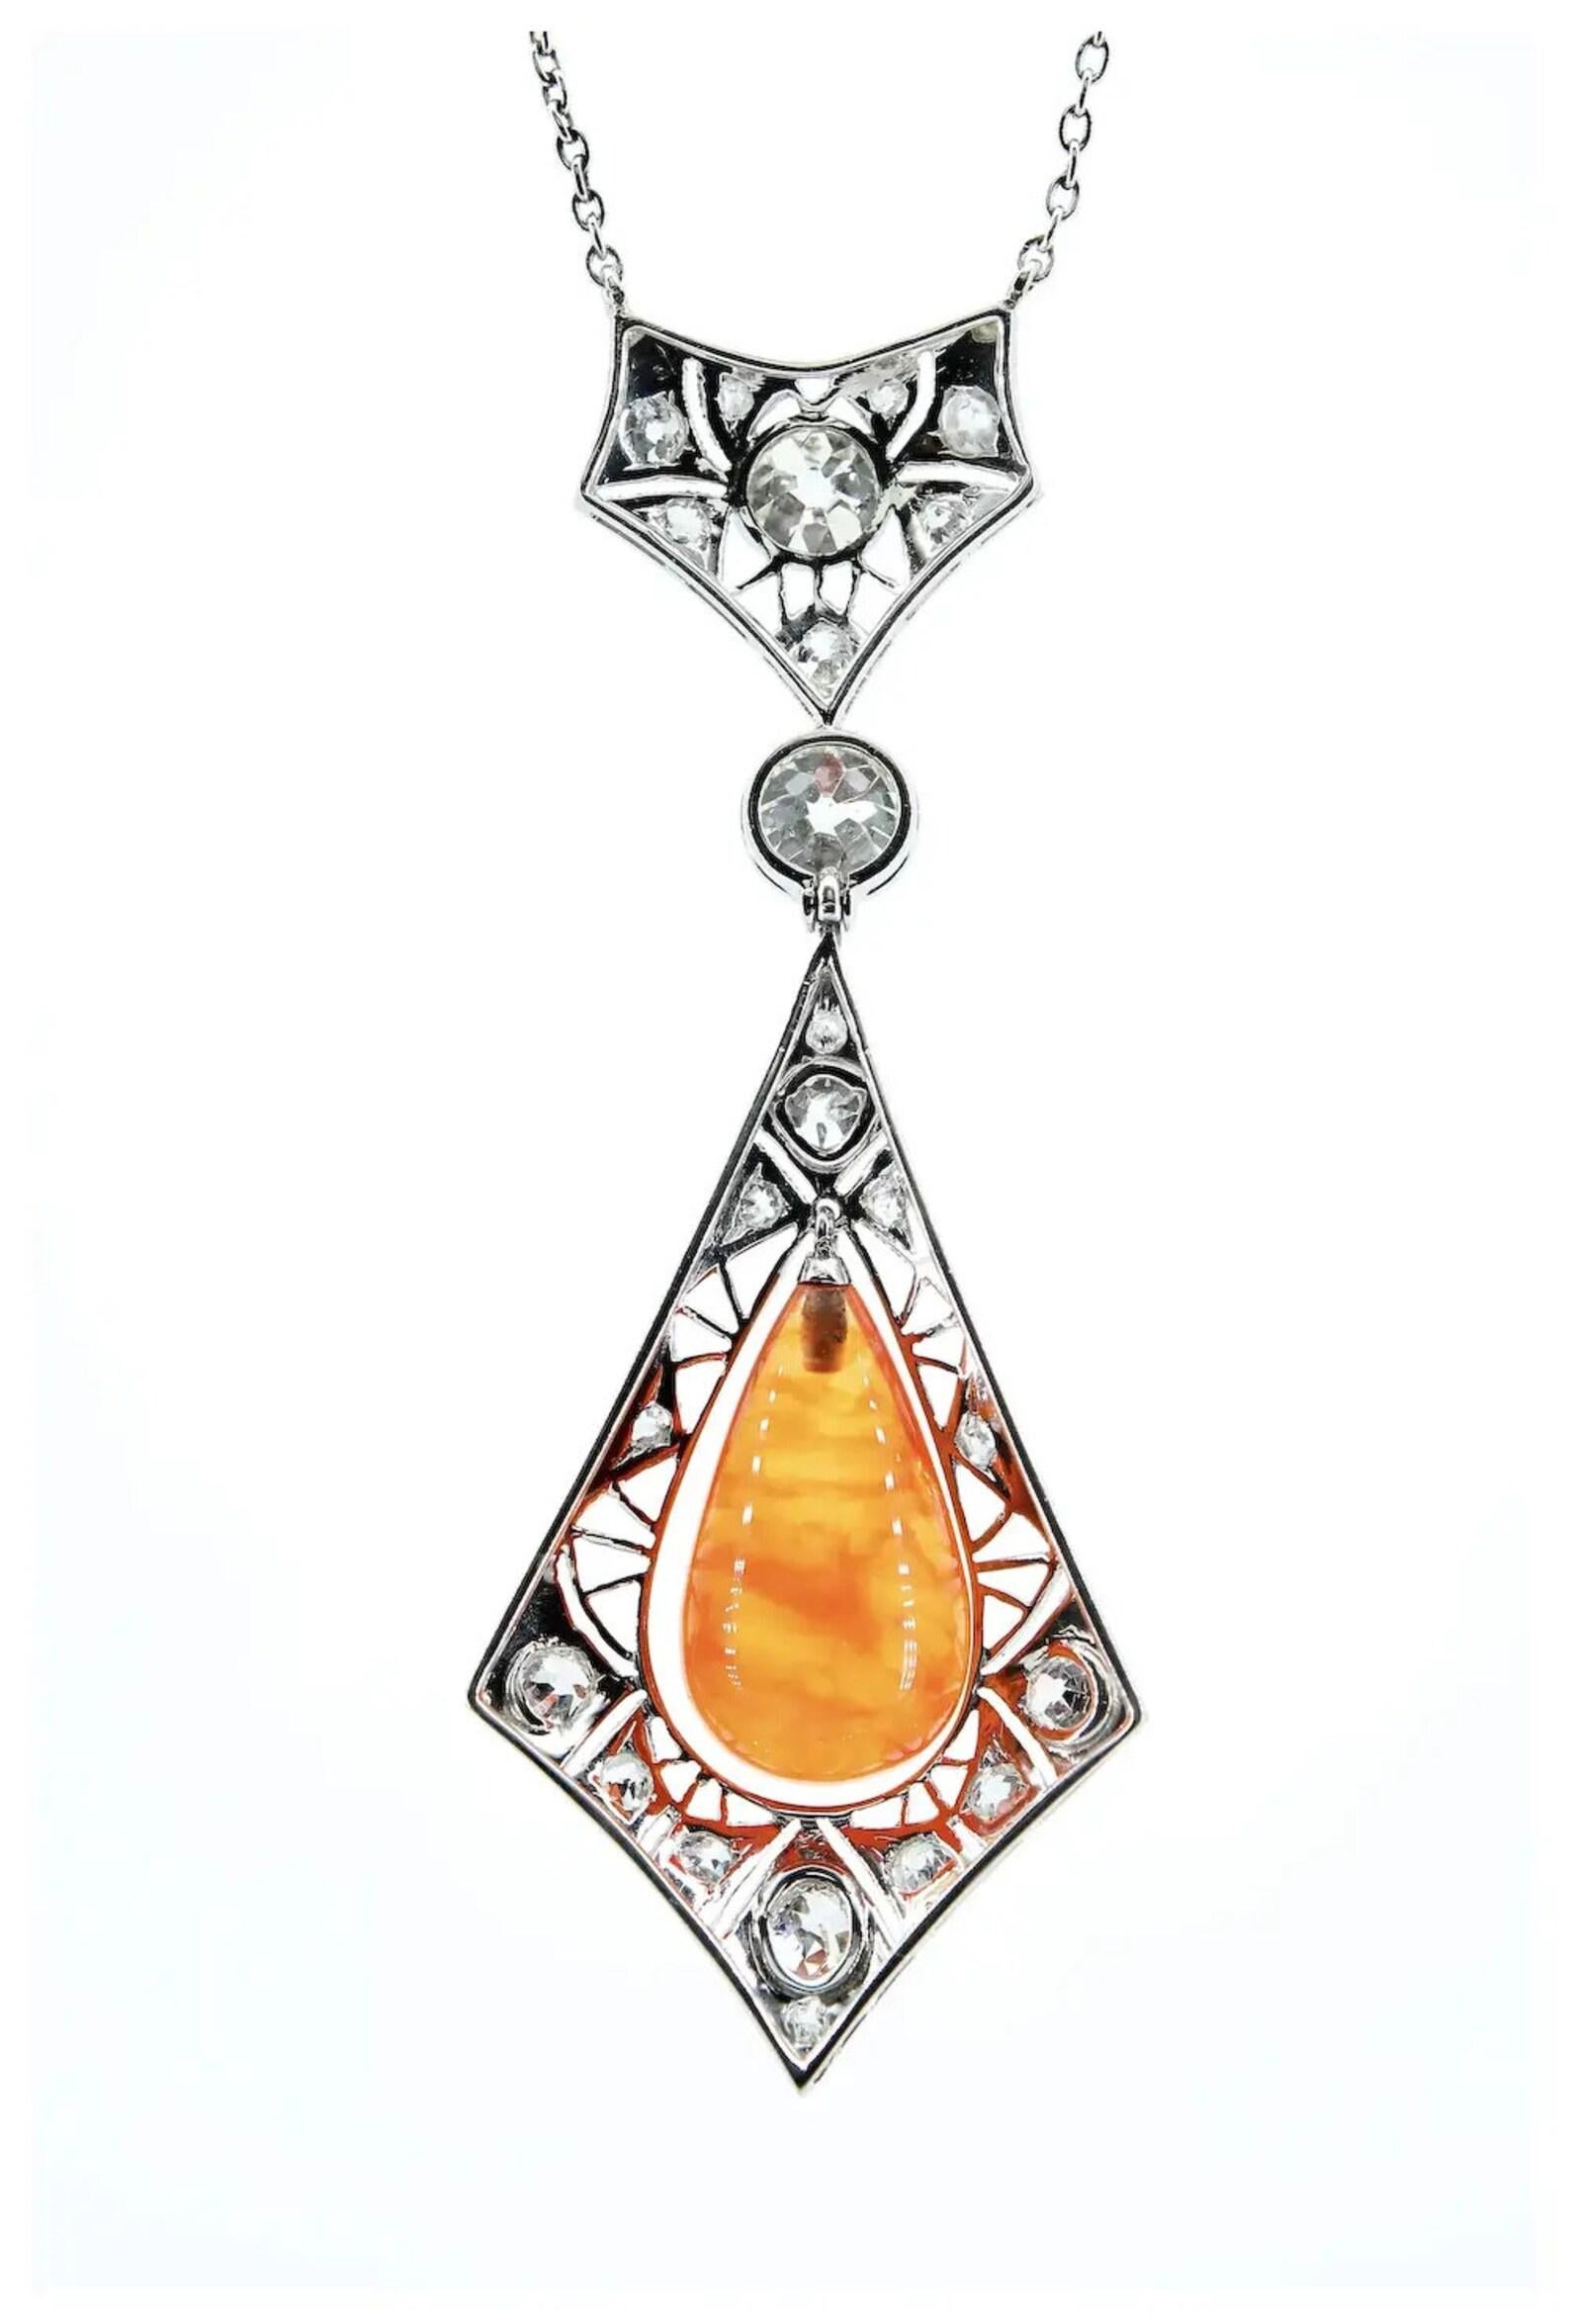 A One of a Kind Art Deco period Fire Opal and diamond pendant necklace in platinum.

Centered by an approximately 10.75ct Fire Opal displaying a beautiful golden orange color with excellent flash and translucency.

Complemented by a duet of bezel